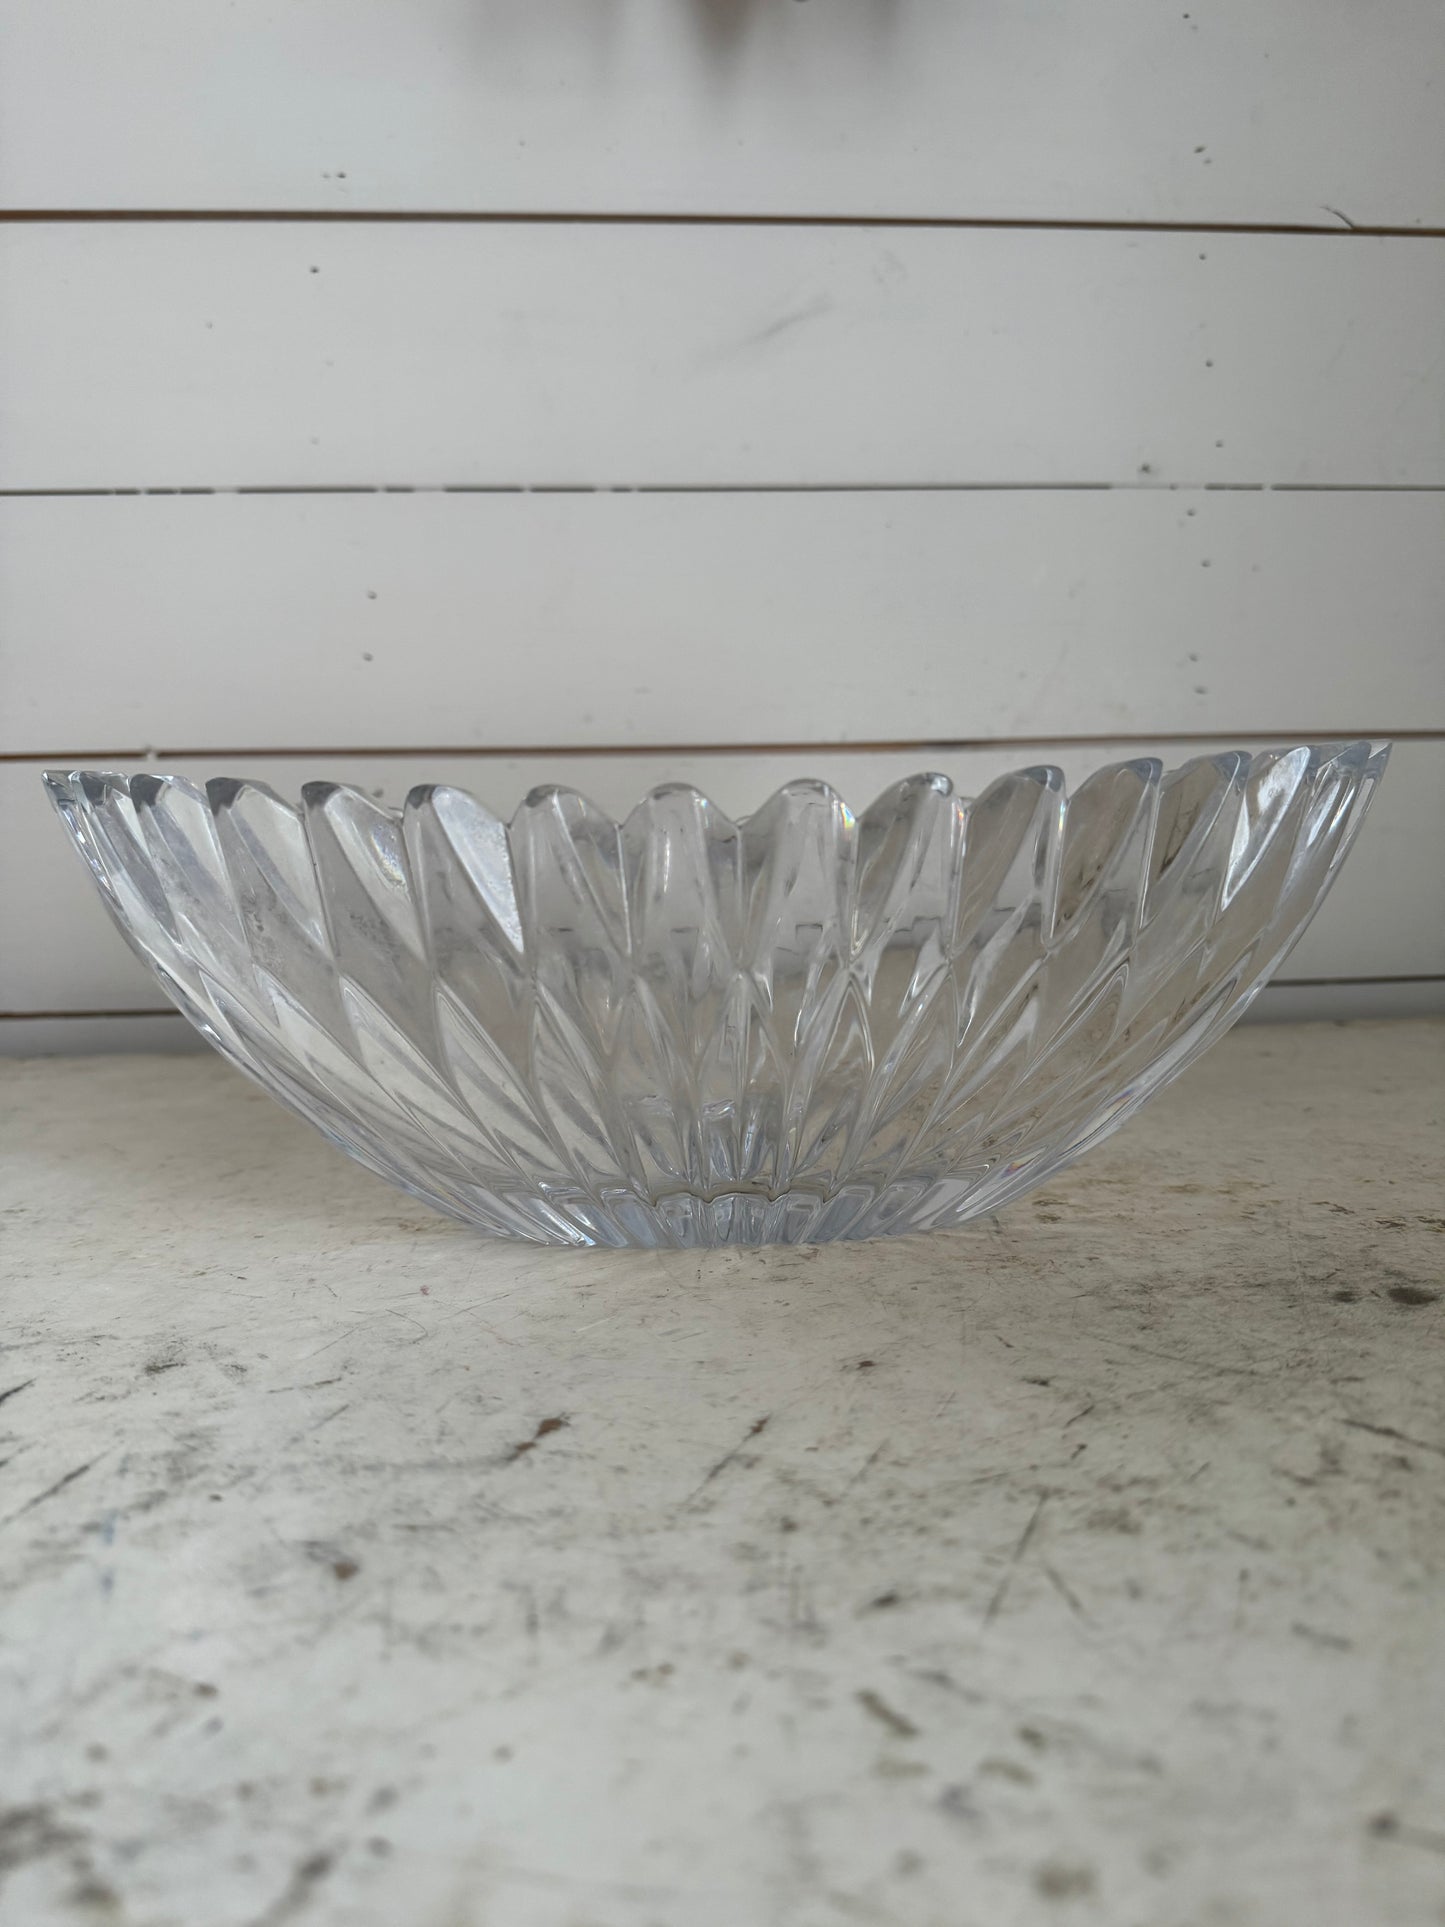 Mikasa Damocles Clear Lead Crystal Oval 13" Starburst 36 point edge - has chip we will sand it smooth